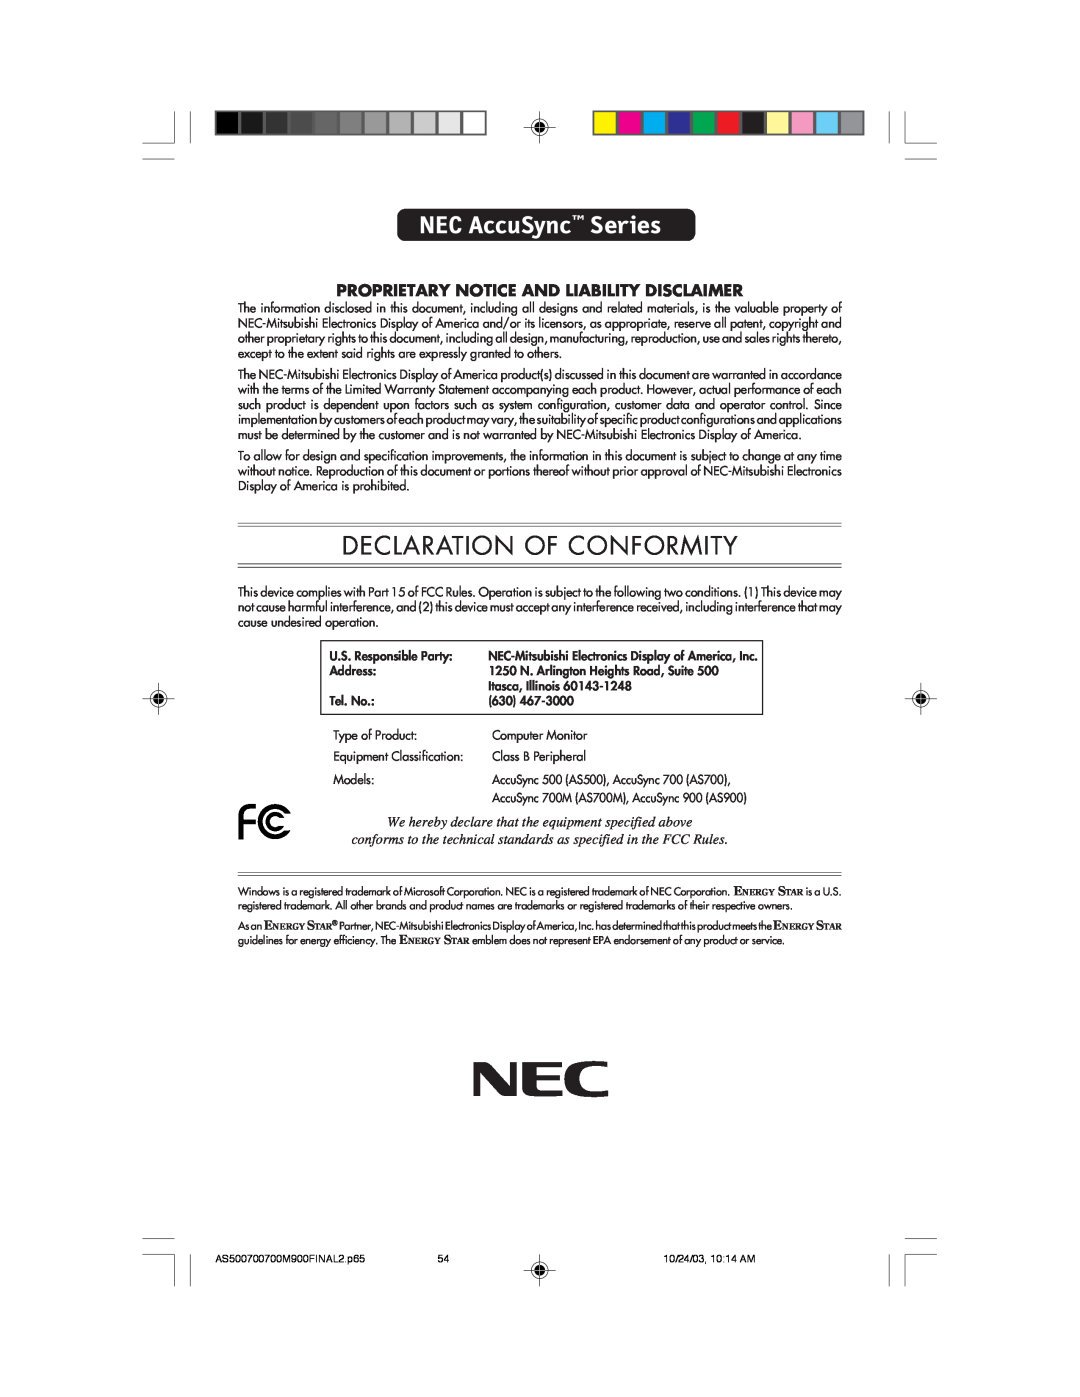 NEC 500, 900, 700 manual NEC AccuSync Series, Declaration Of Conformity, Proprietary Notice And Liability Disclaimer 